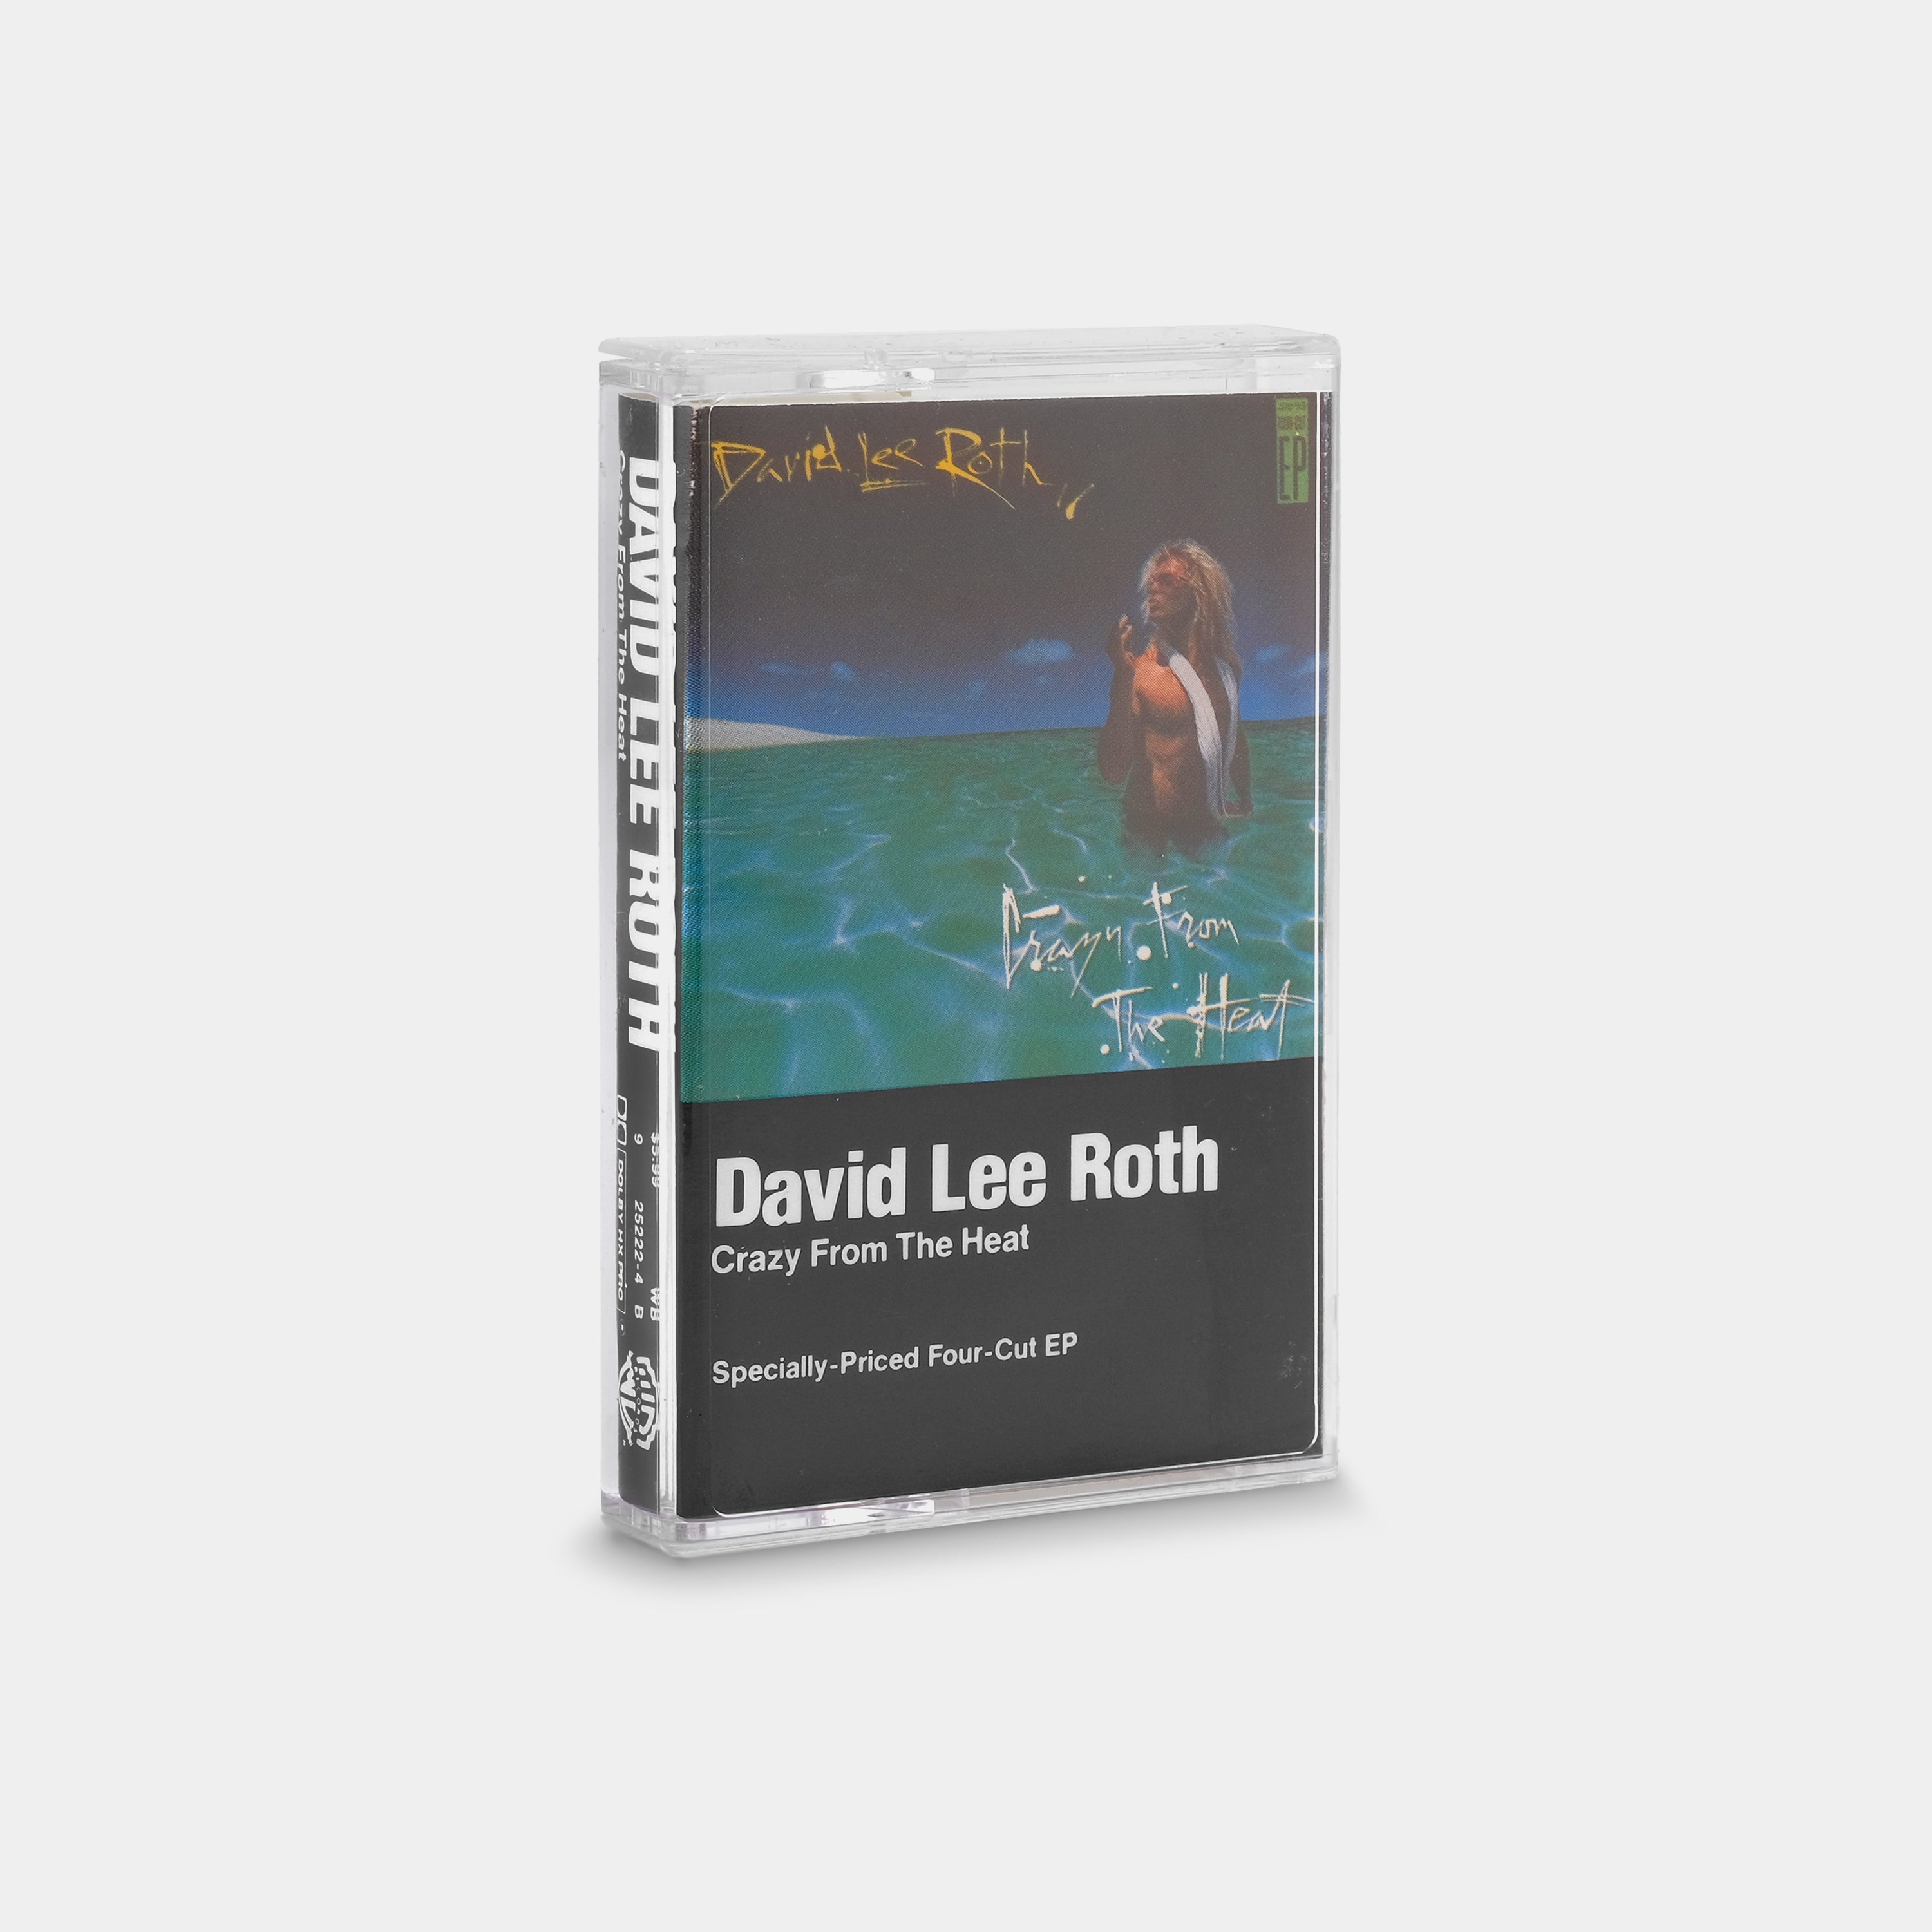 David Lee Roth - Crazy From The Heat Cassette Tape